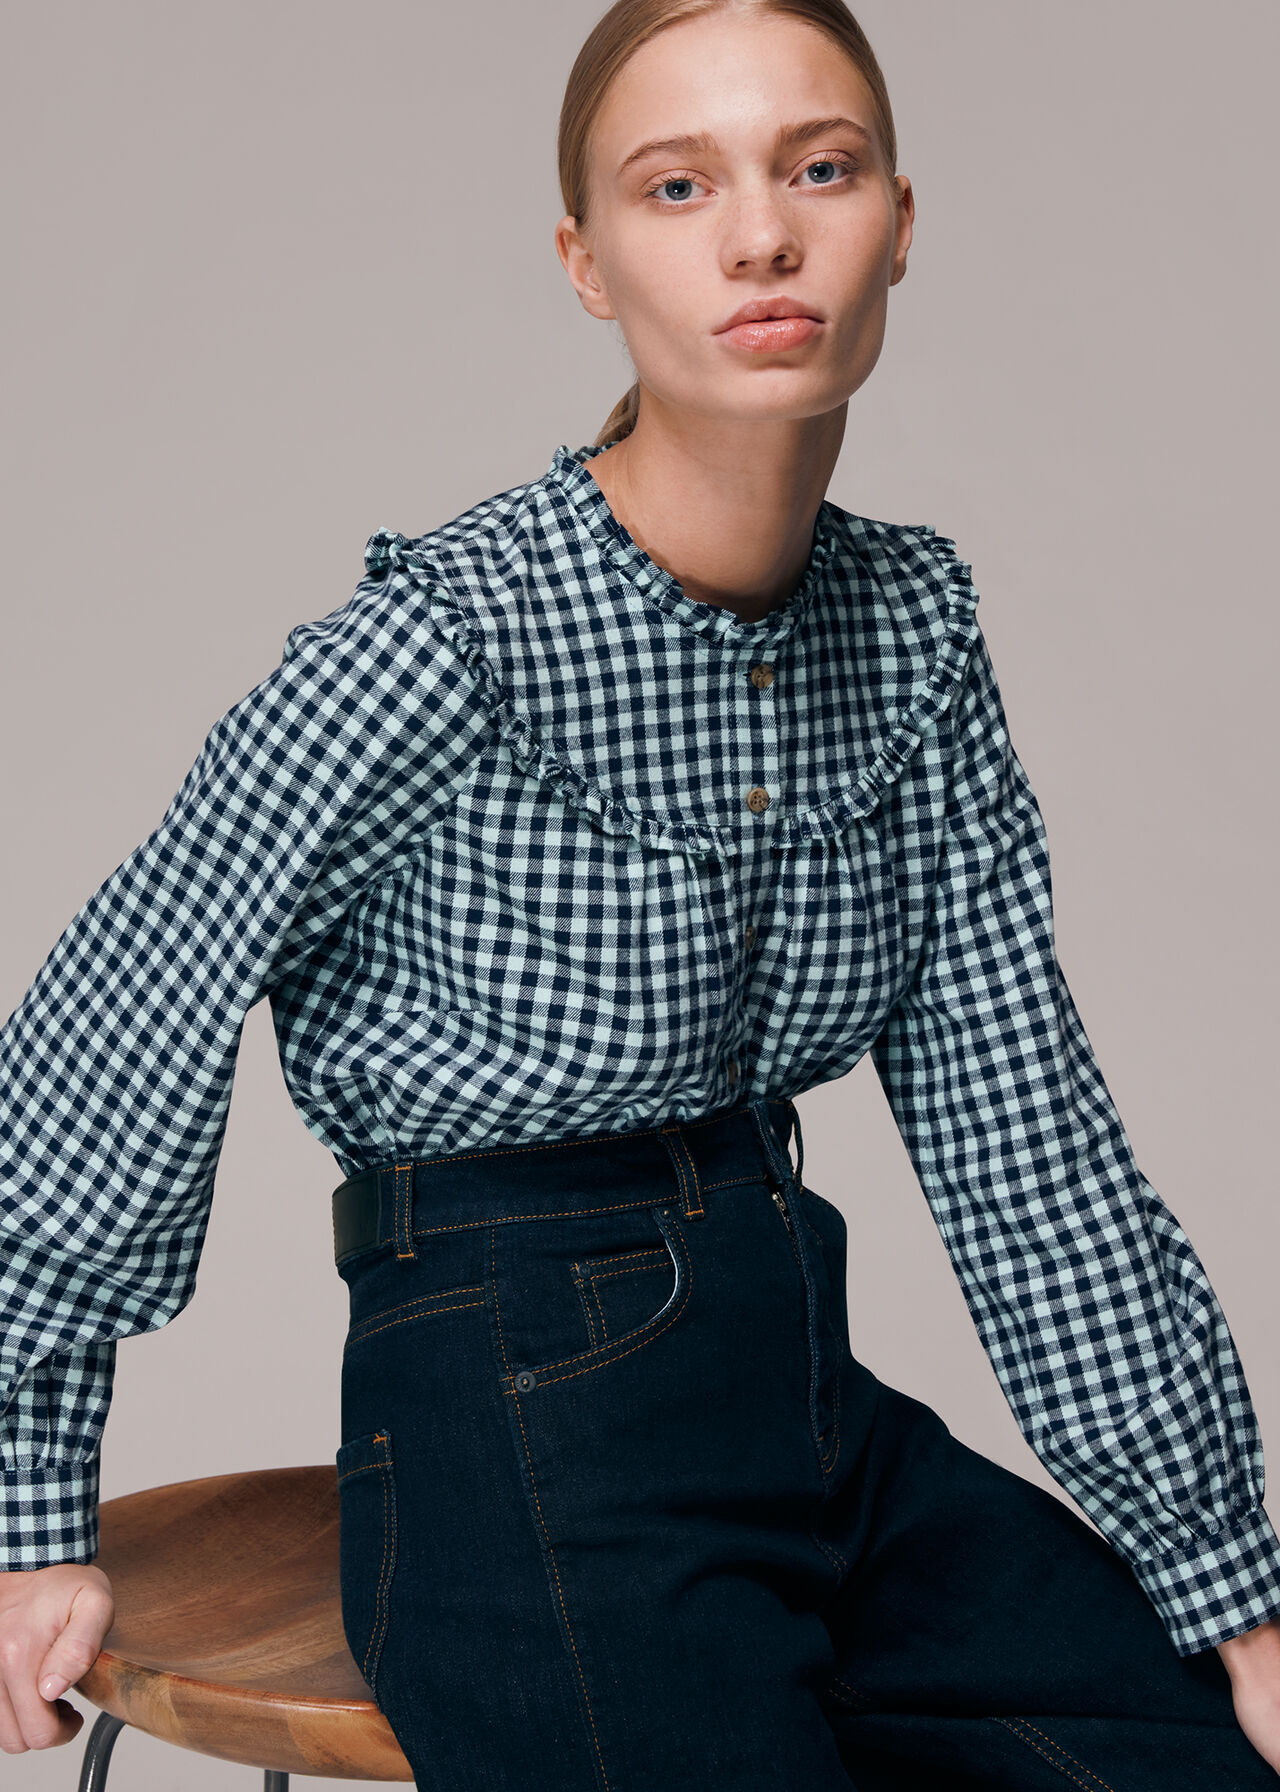 Multicolour Gingham Frill Detail Top | WHISTLES | Whistles